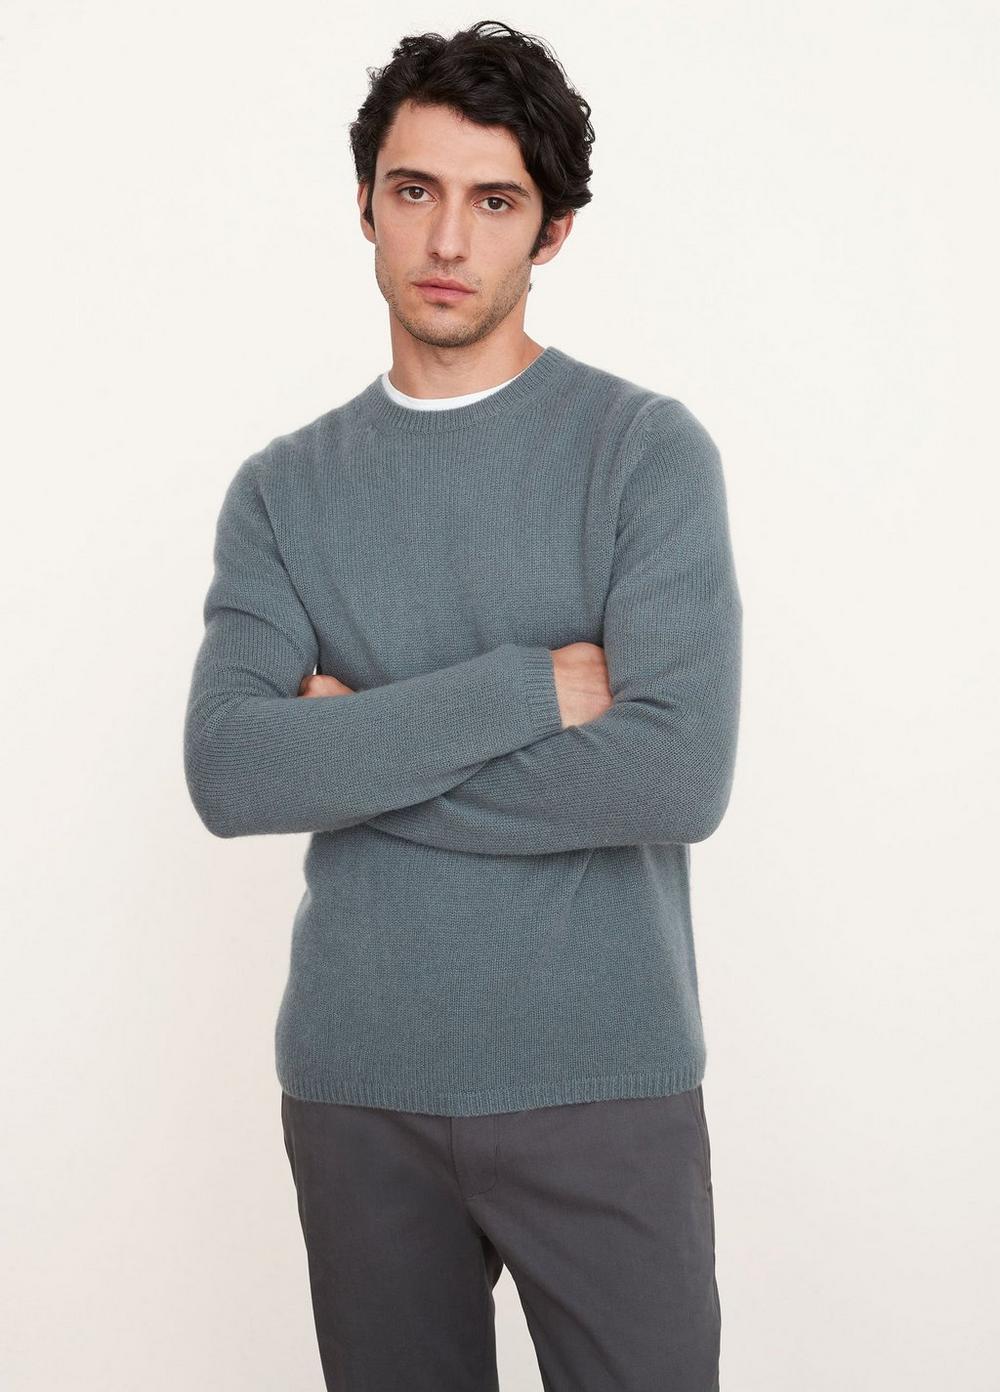 Cashmere Long Sleeve Crew Neck Sweater